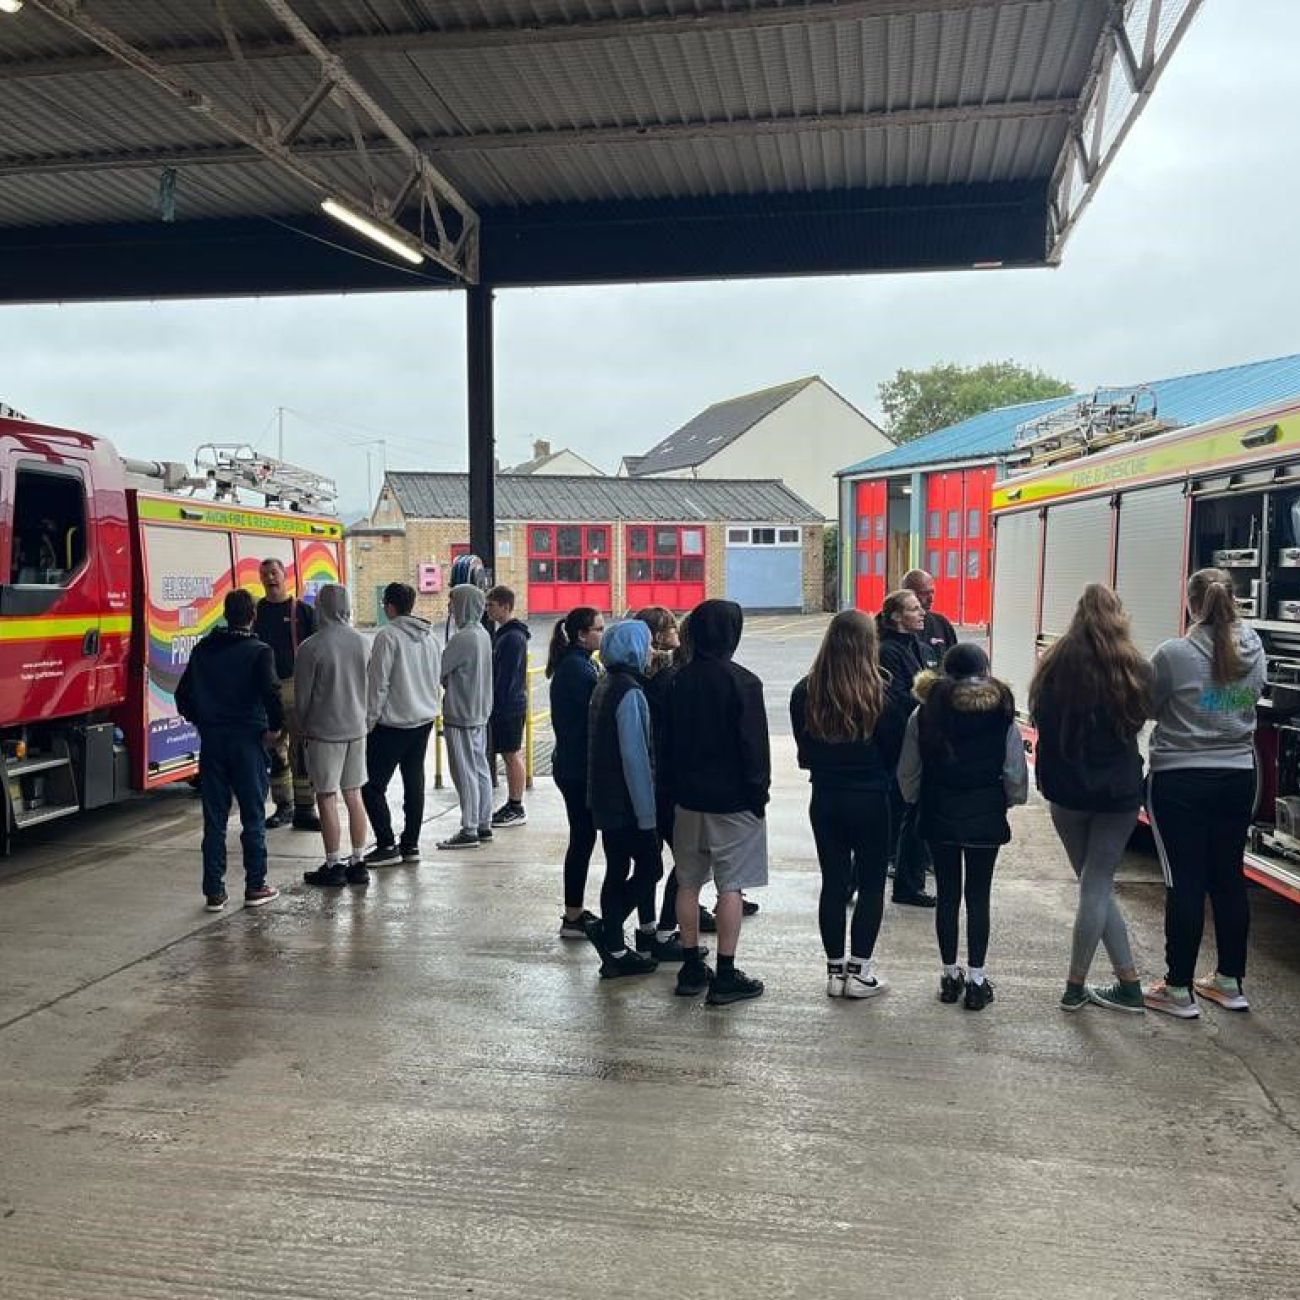 Learners listening to a talk stood by fire engines